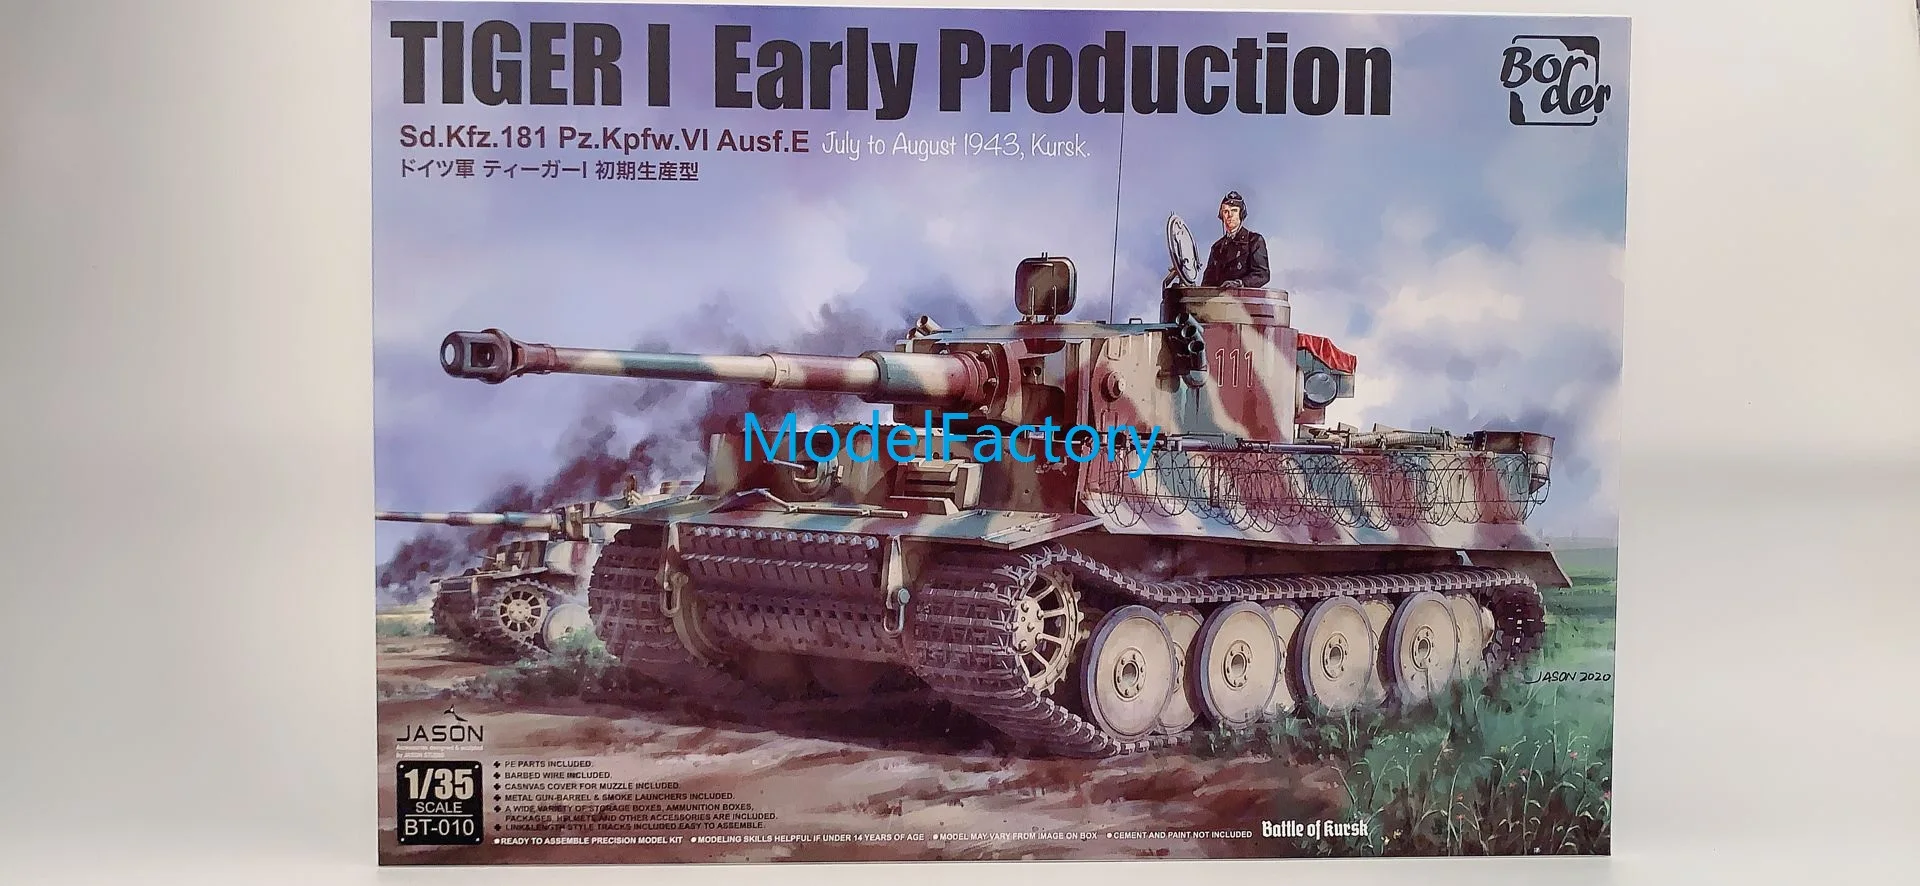 

Border BT-010 1/35 Tiger I Early Production - July to August 1943 Kursk